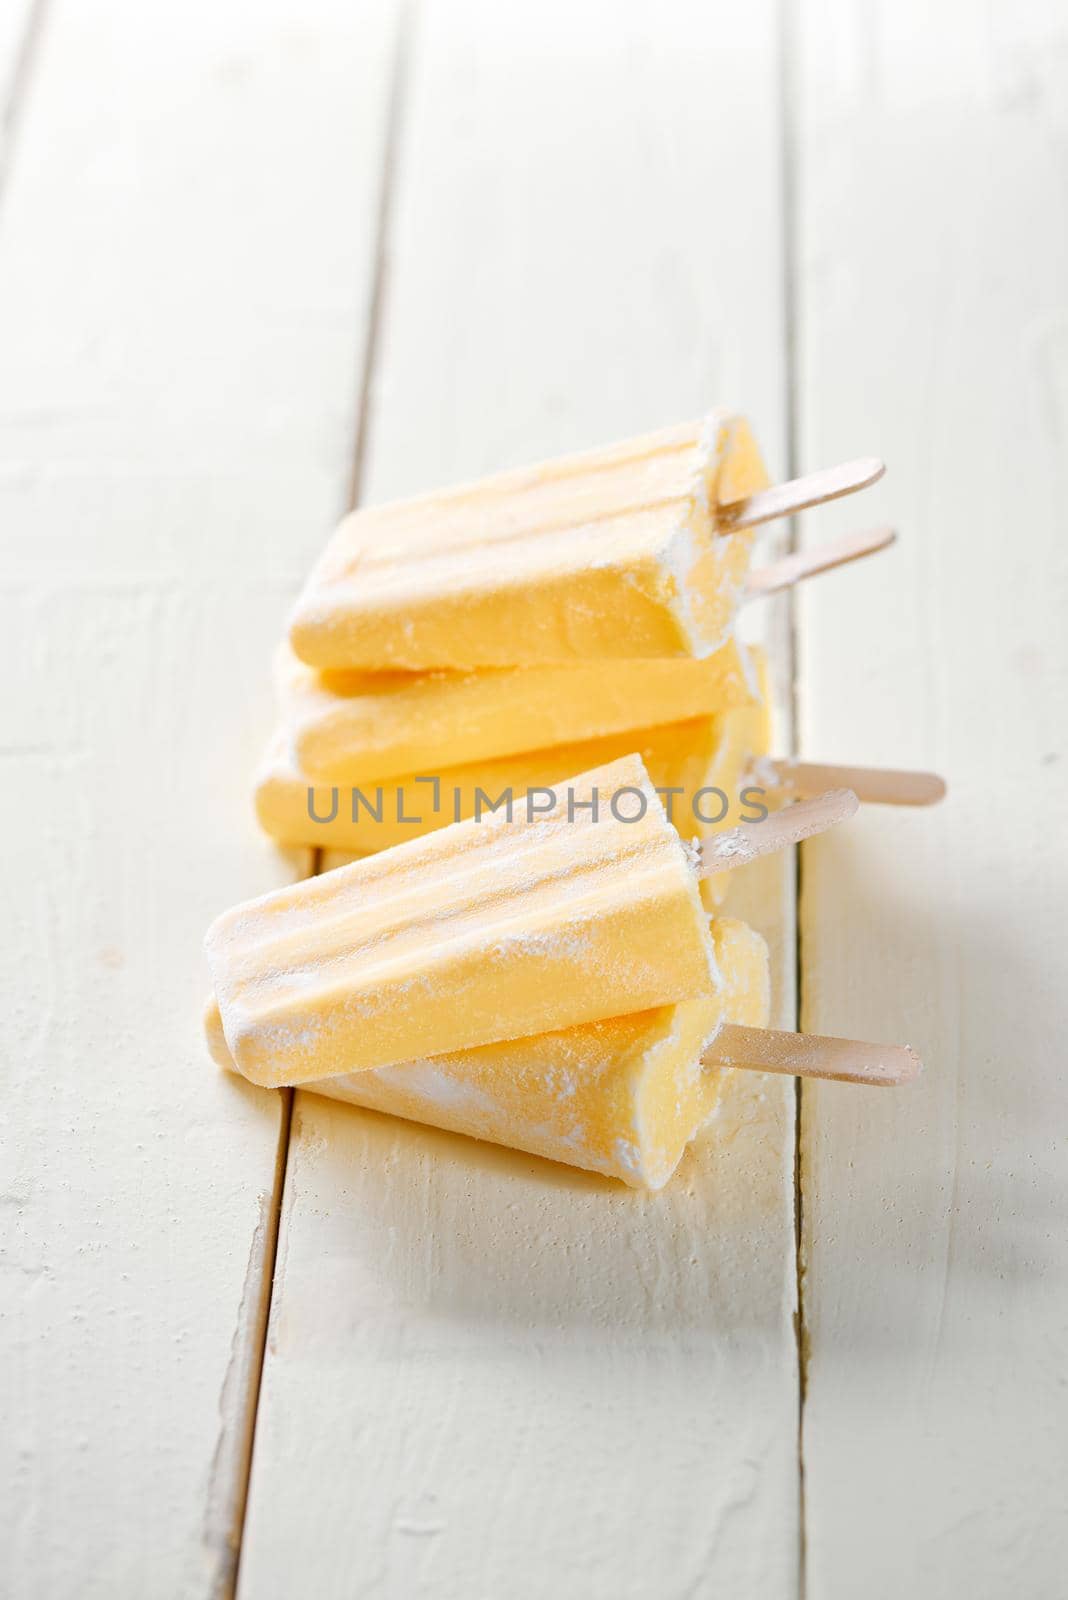 Tall stack of yellow pineapple ice lollies, on a wooden table with white tiled background. Filtered for retro effect